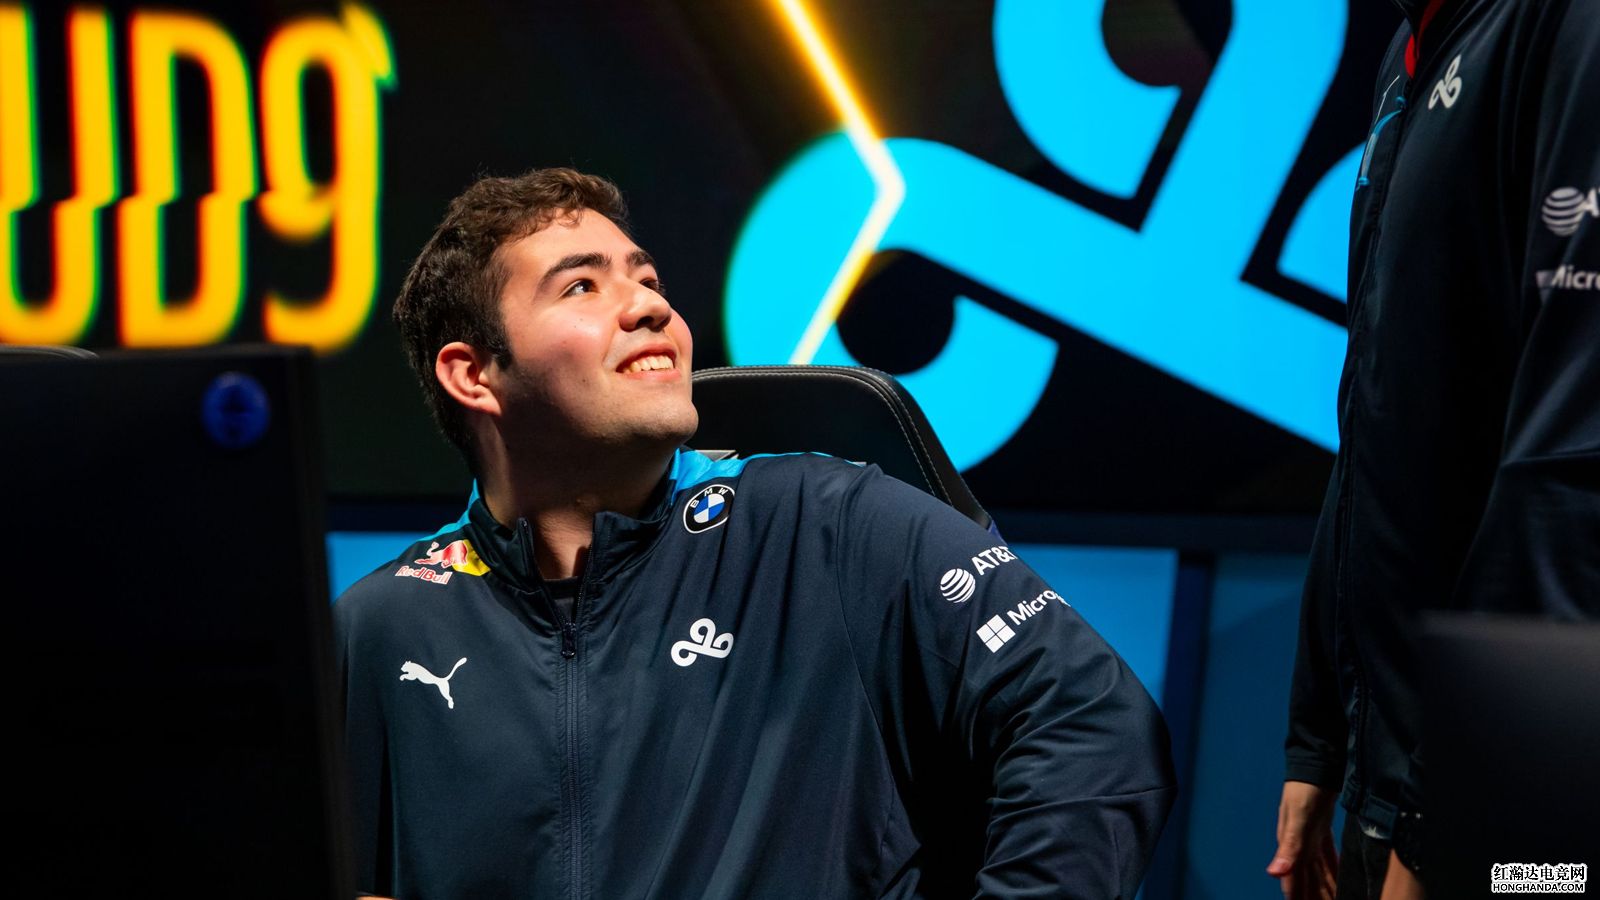 experiment-over-fudge-returns-to-cloud9-top-lane-replaces-summit-for-lcs-2022-summer.jpg